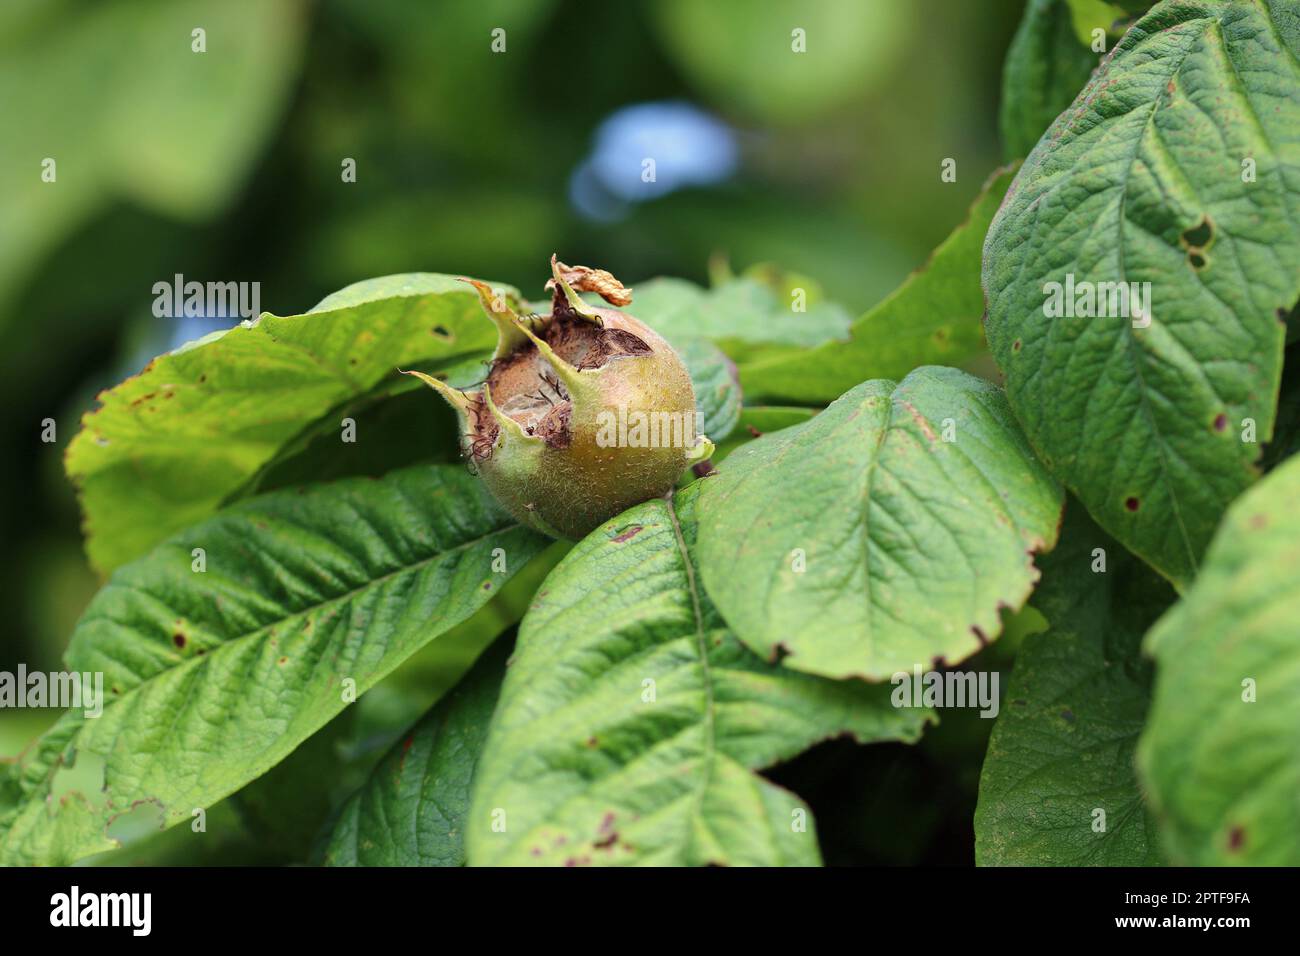 Ripe medlar, Mespilus germanica, fruit on a tree with leaves blurred as the background. Stock Photo